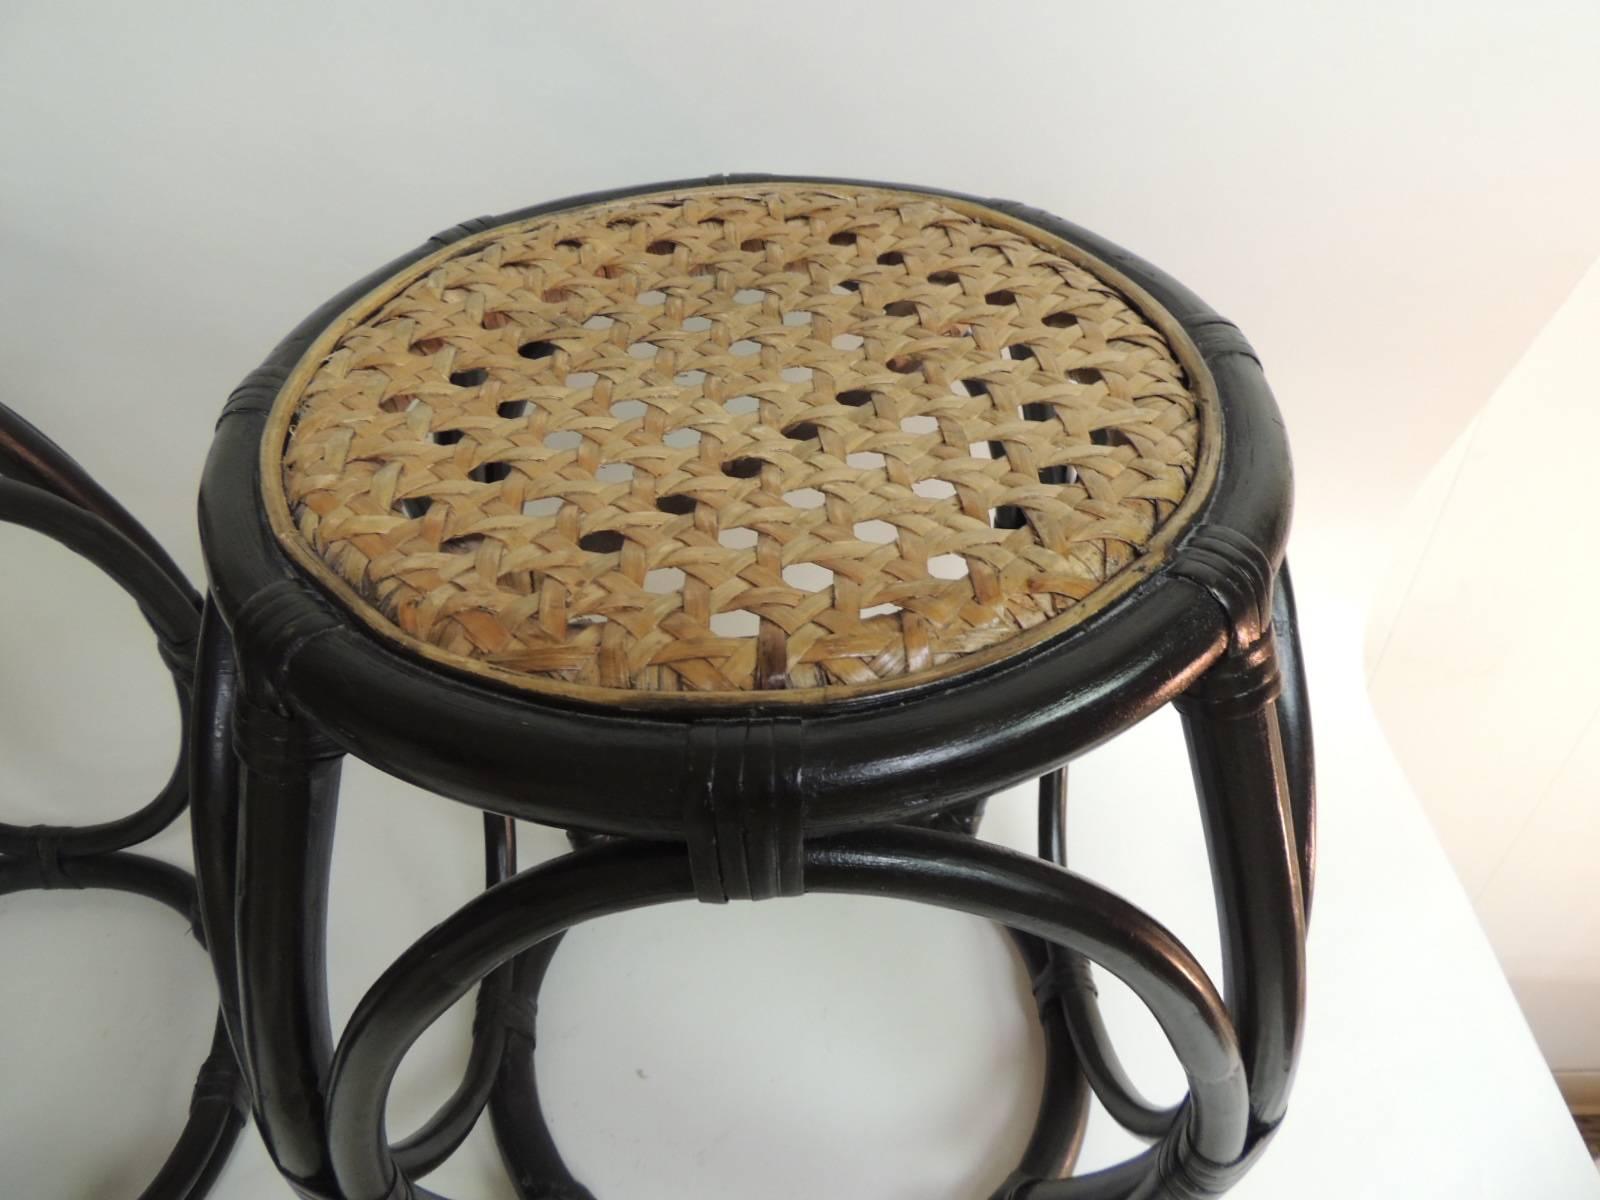 Hollywood Regency HOLIDAY SALE: Pair of Vintage Bentwood Thonet Style Stools with Wicker Seats